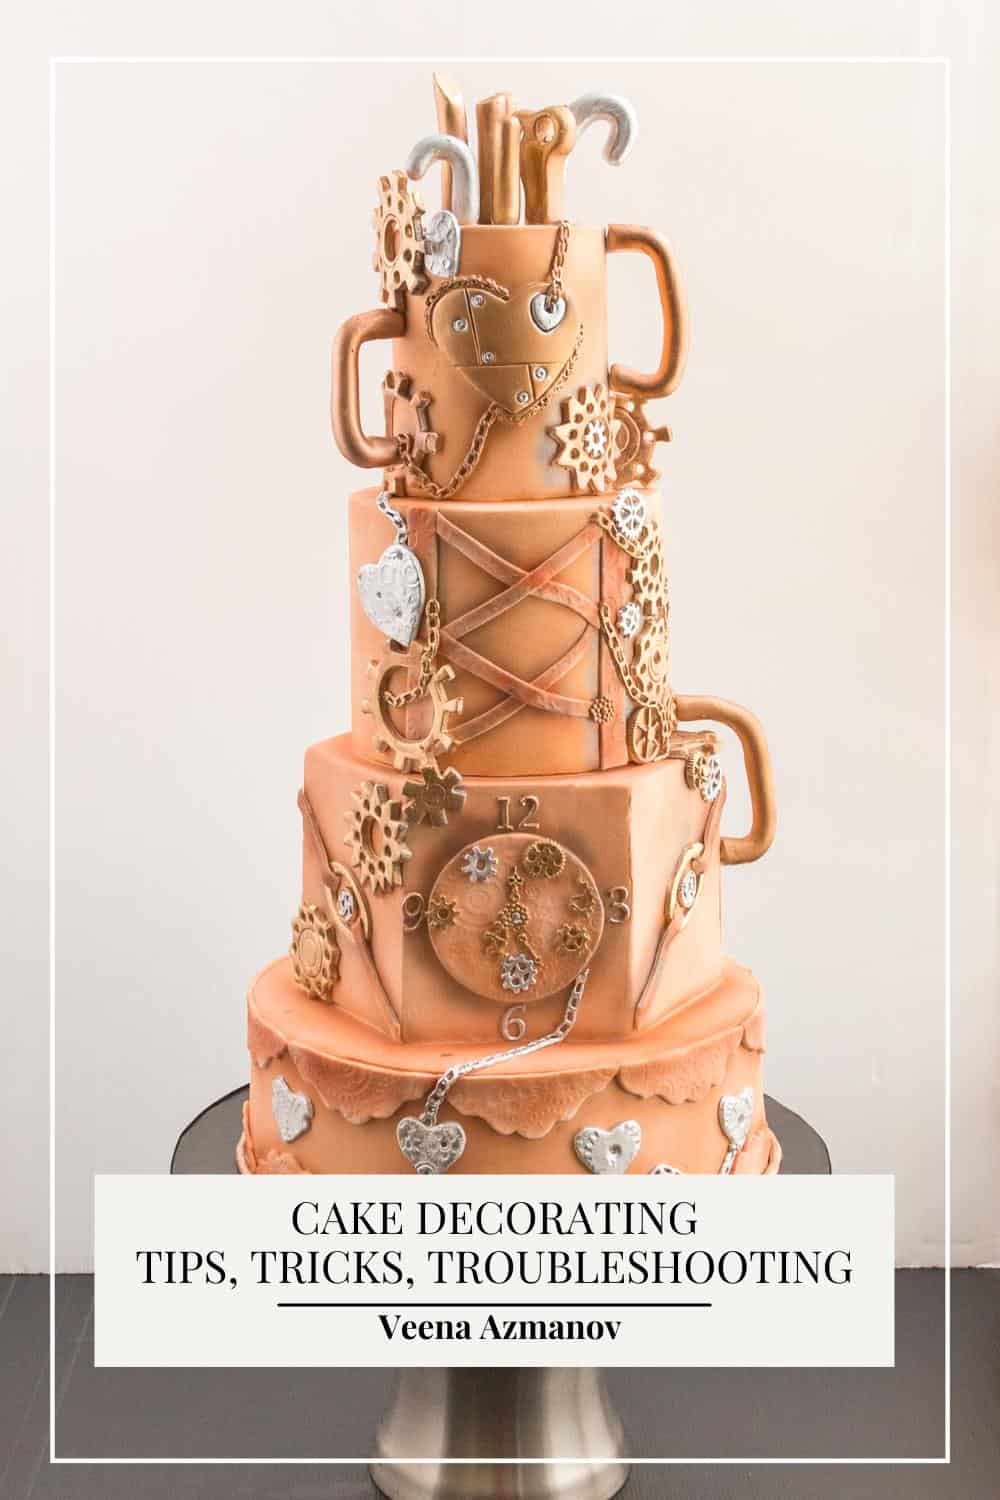 Pinterest image for cake decorating tips and troubleshooting.